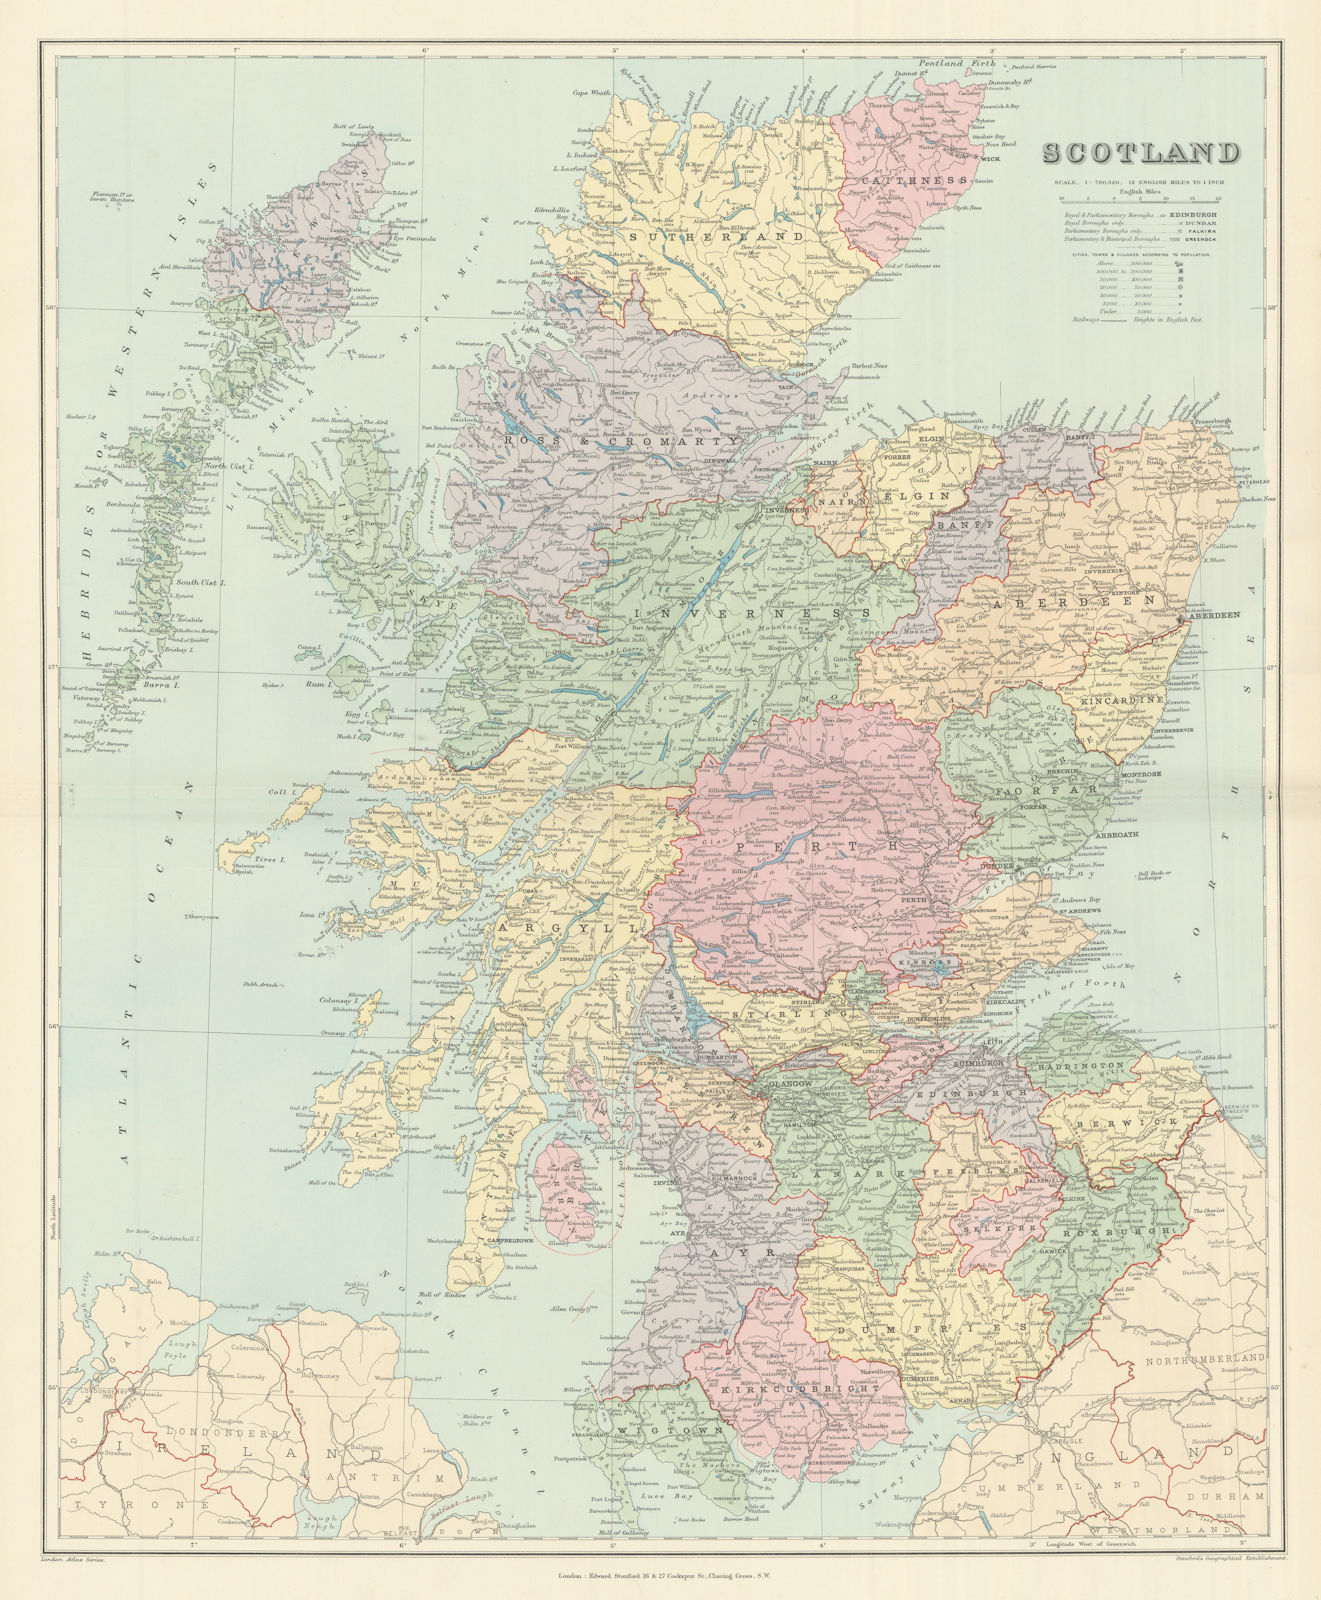 Associate Product Scotland. Counties & railways. Large 66x54cm. STANFORD 1894 old antique map